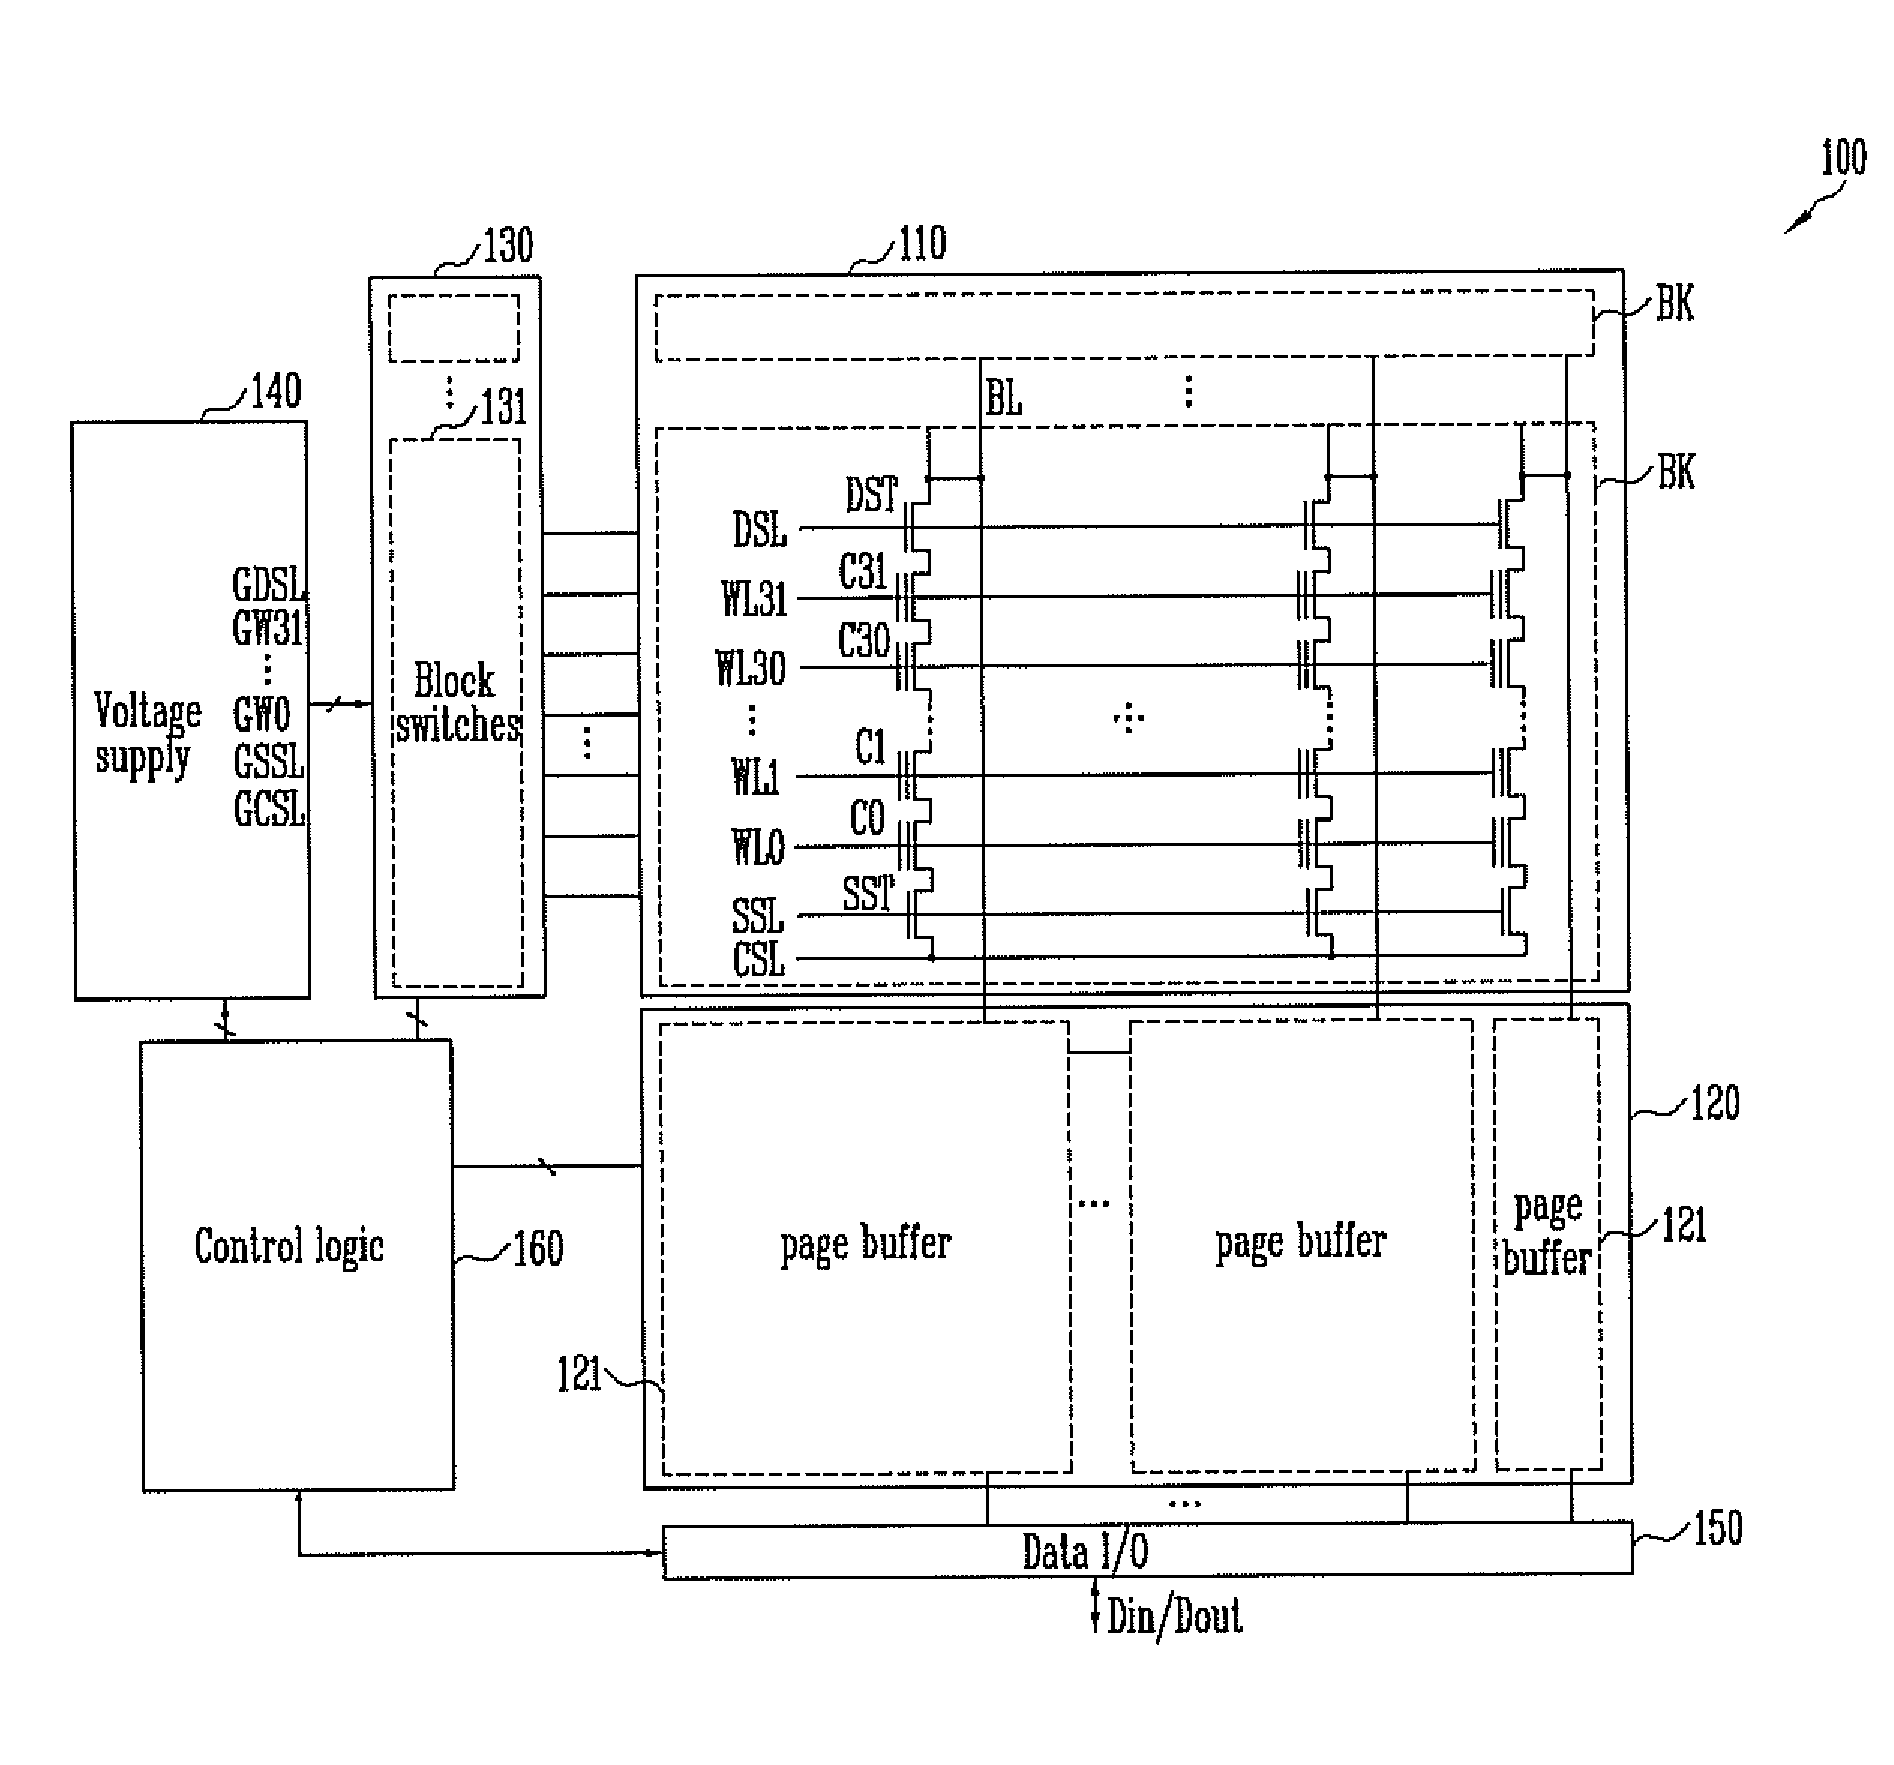 Method of programming a semiconductor memory device